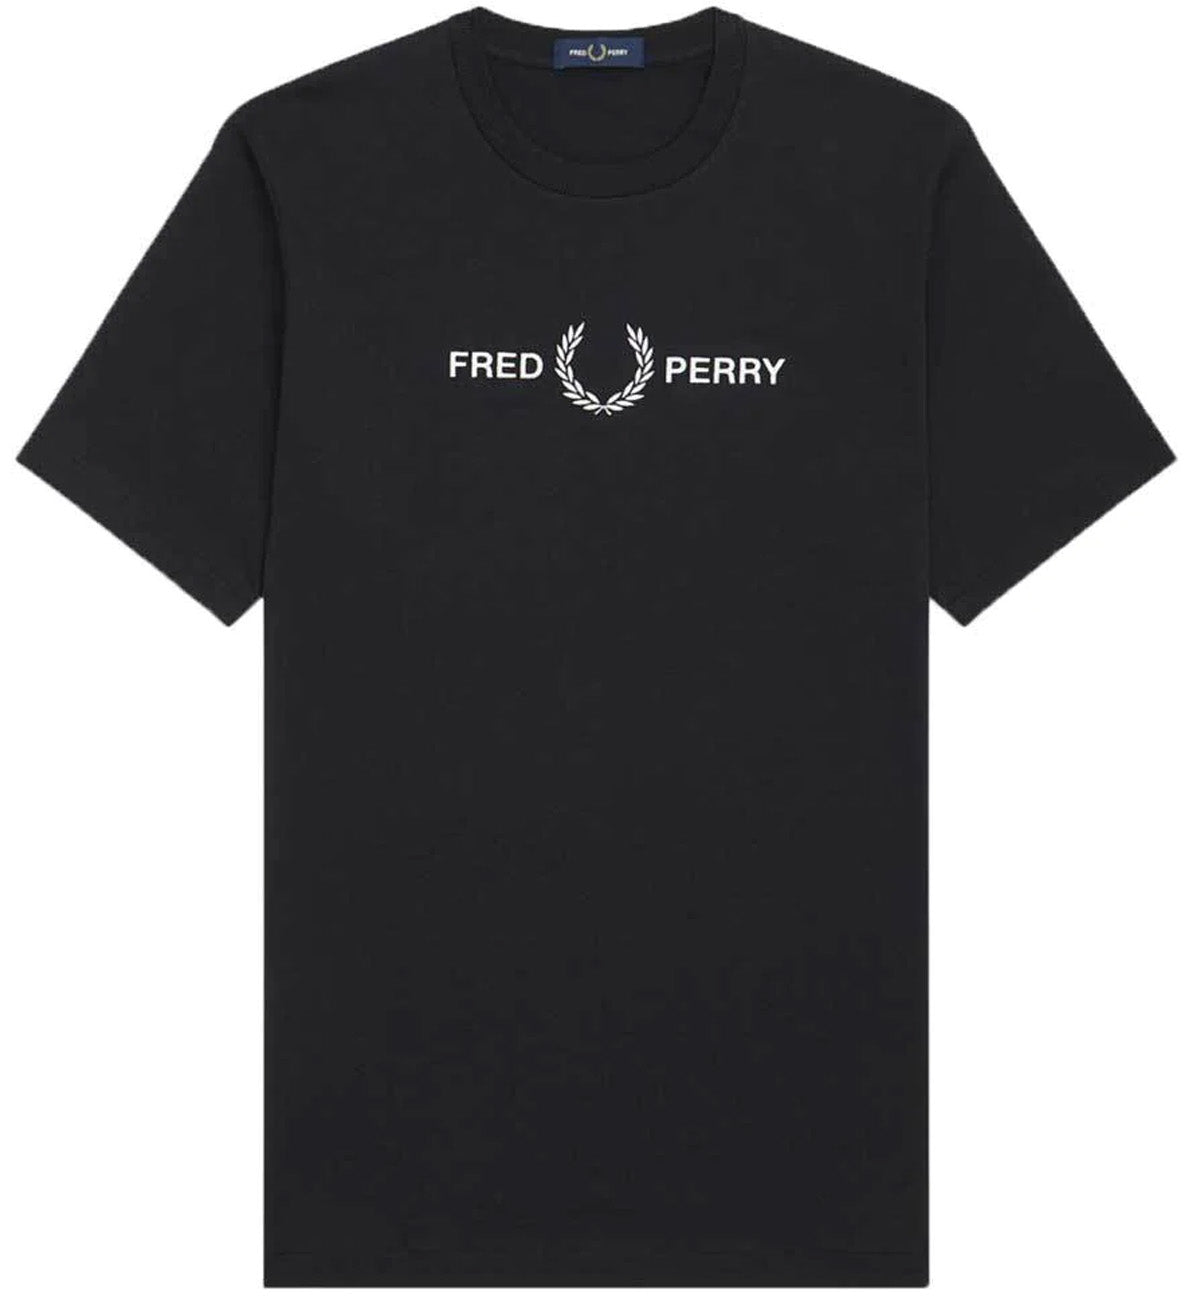 Fred Perry Signature Logo T-Shirt (Black)